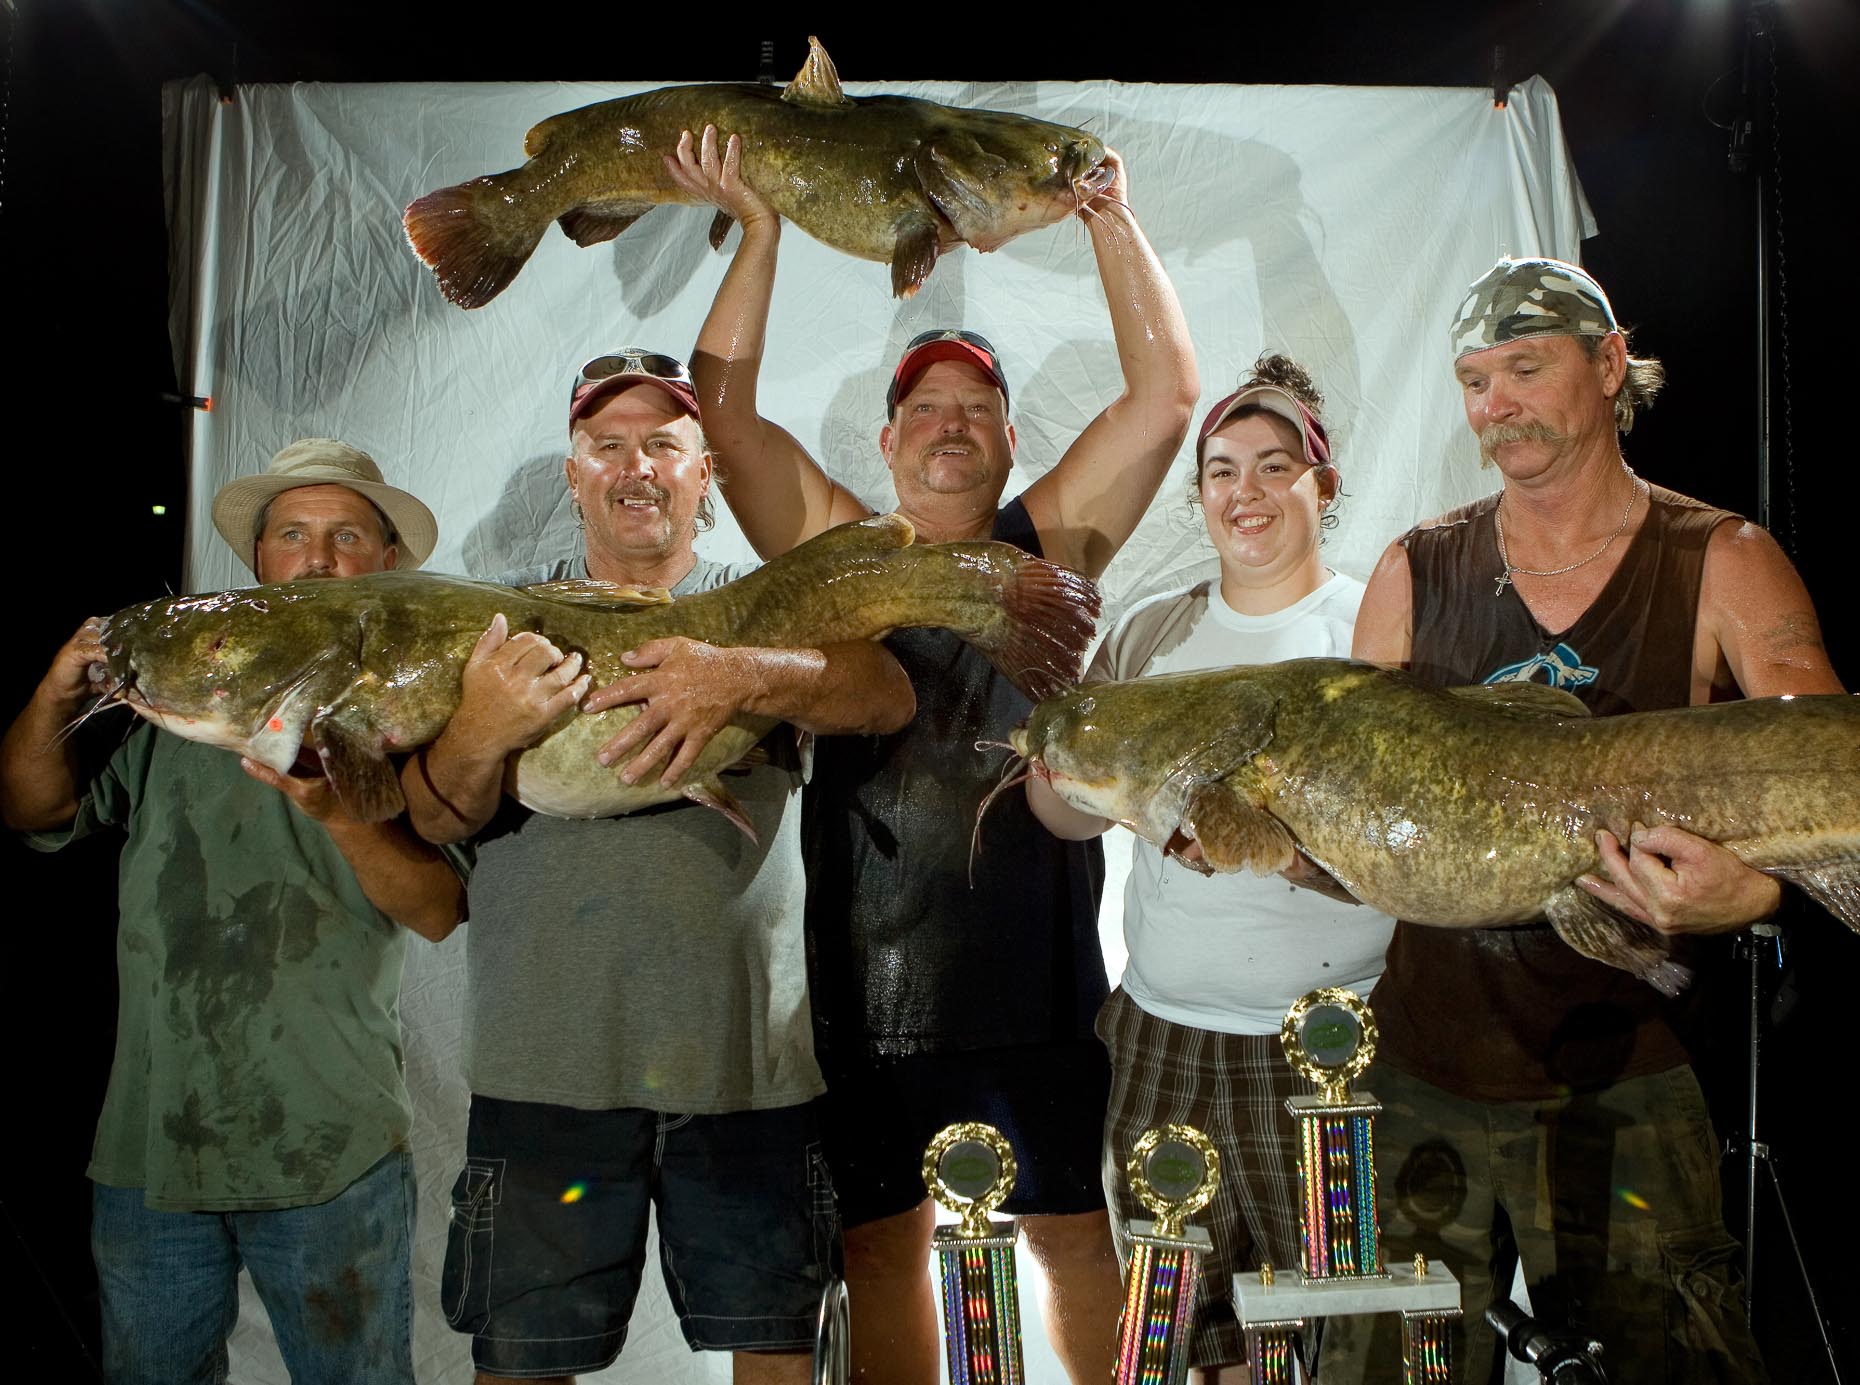 Okie noodling contestants pose for a portrait in Pauls Valley, Oklahoma. 